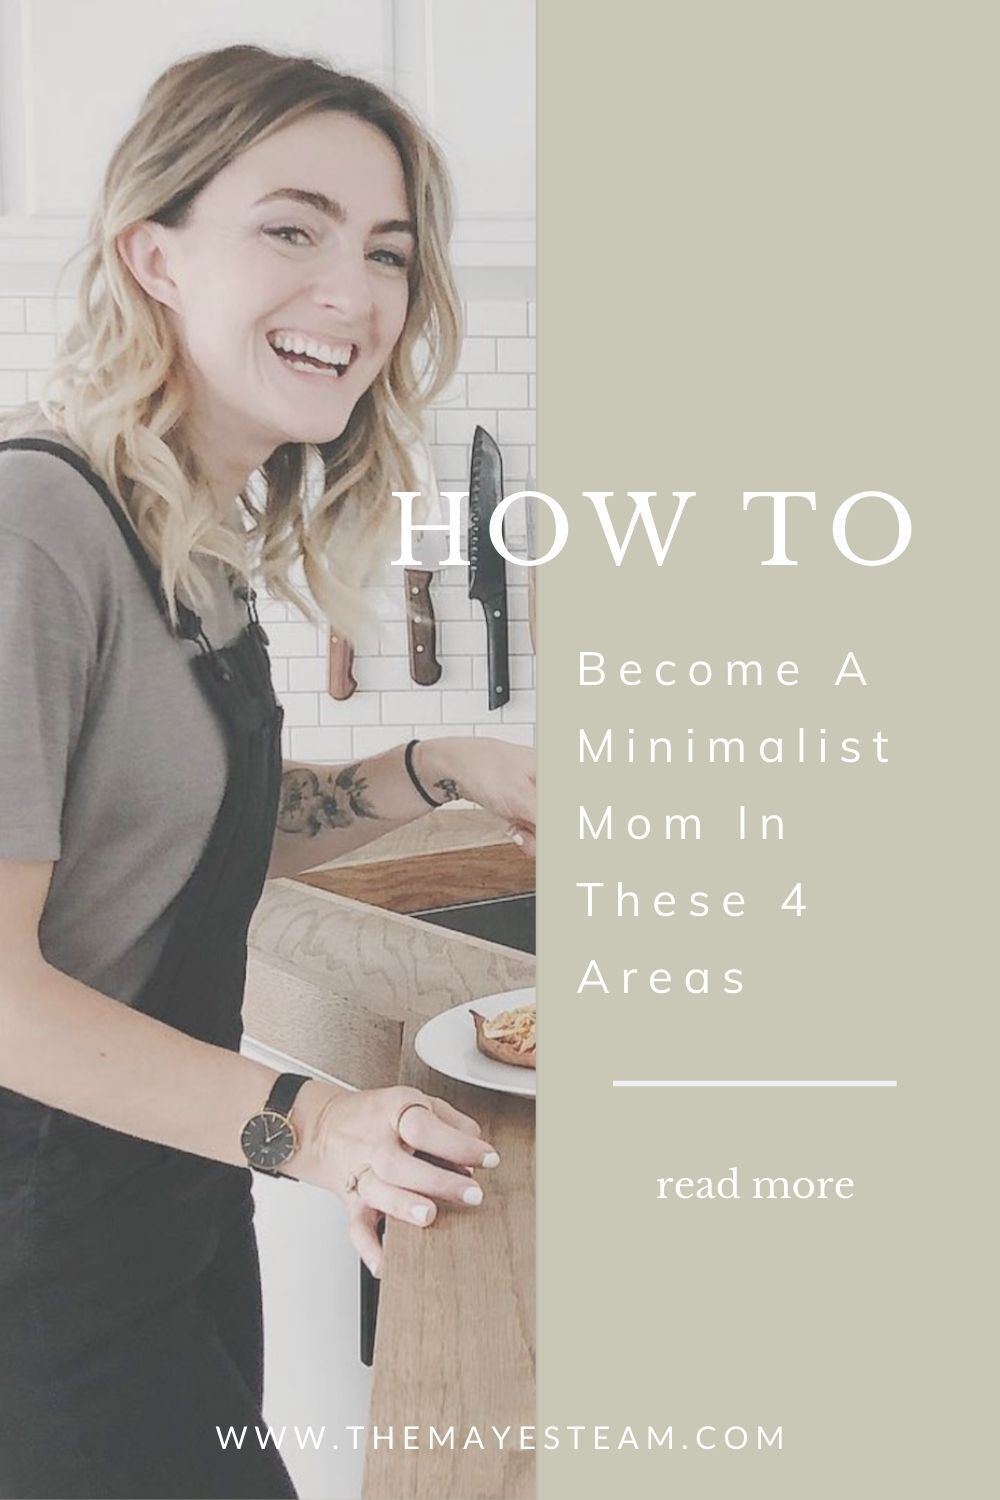 Debbie Mayes smiles while preparing breakfast. Image overlaid with text that reads How to Become a Minimalist Mom in These 4 Areas. Read more.